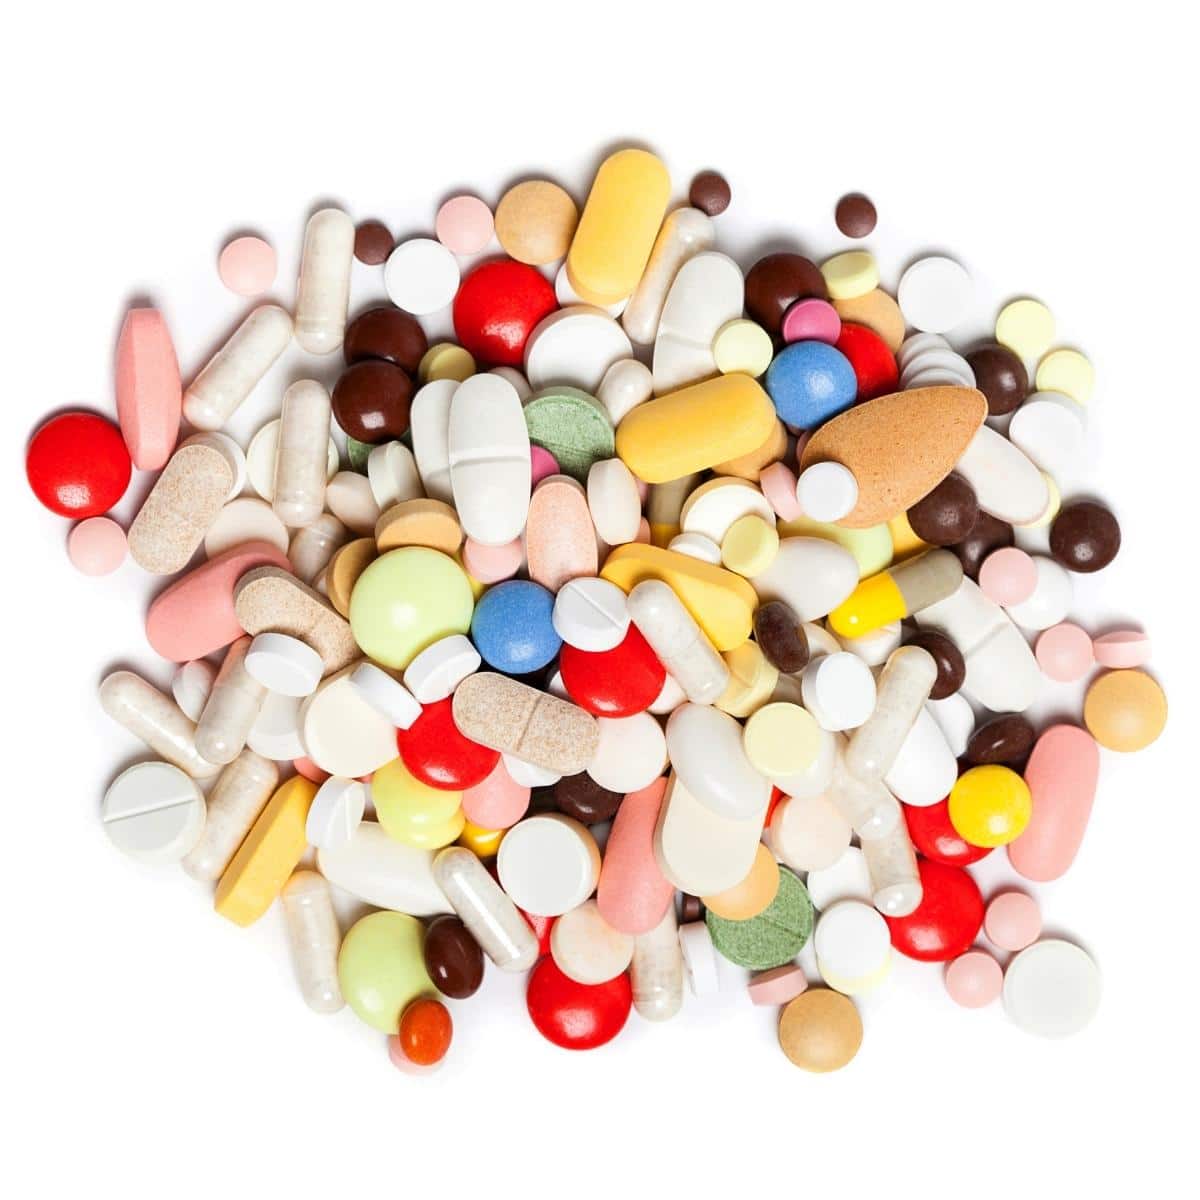 Colored pills, tablets and capsules